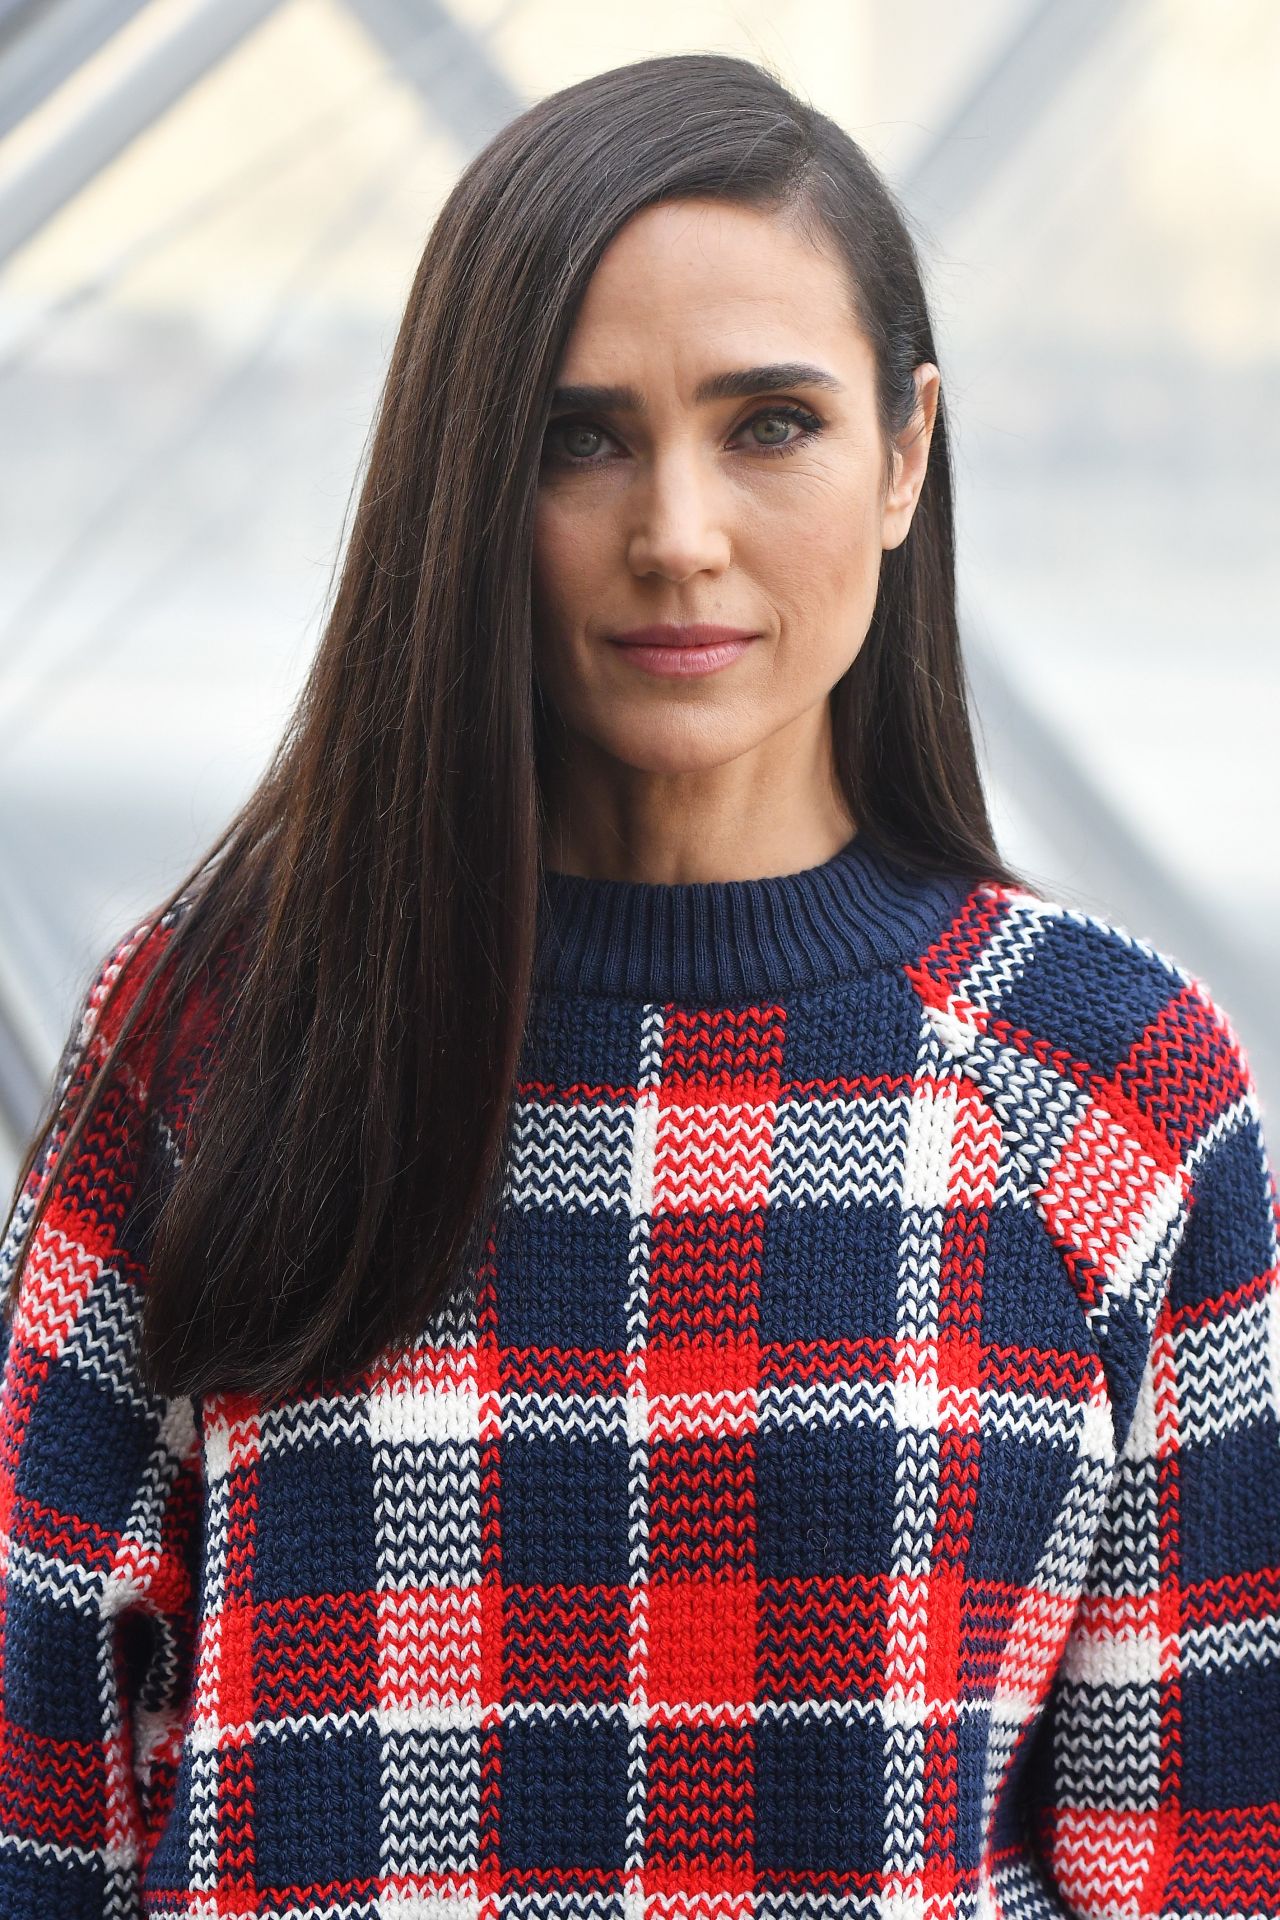 Getting Ready for Louis Vuitton With Jennifer Connelly – WWD